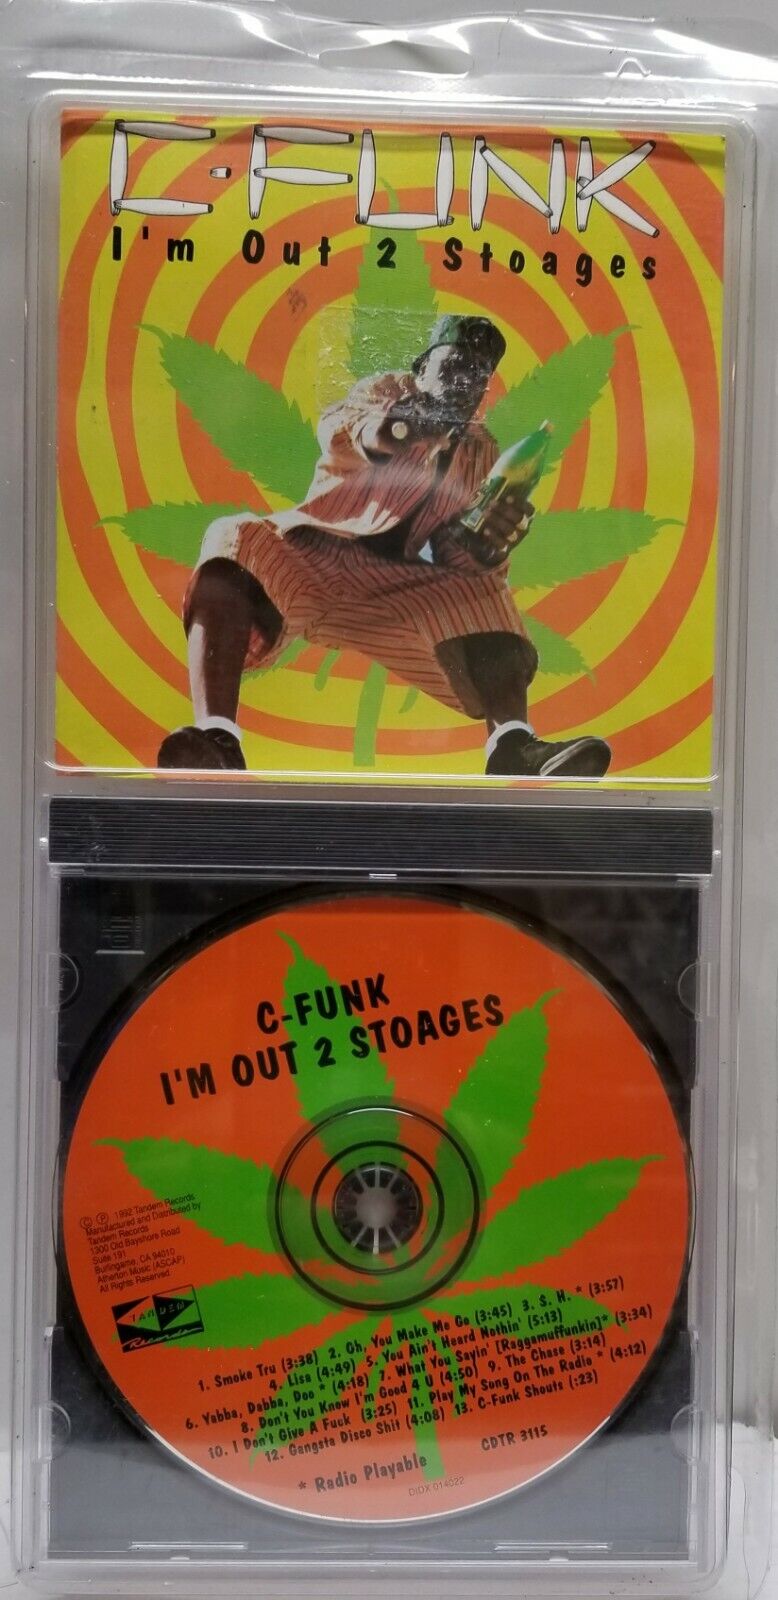 C-Funk-I'm Out 2 Stoages SEALED CD